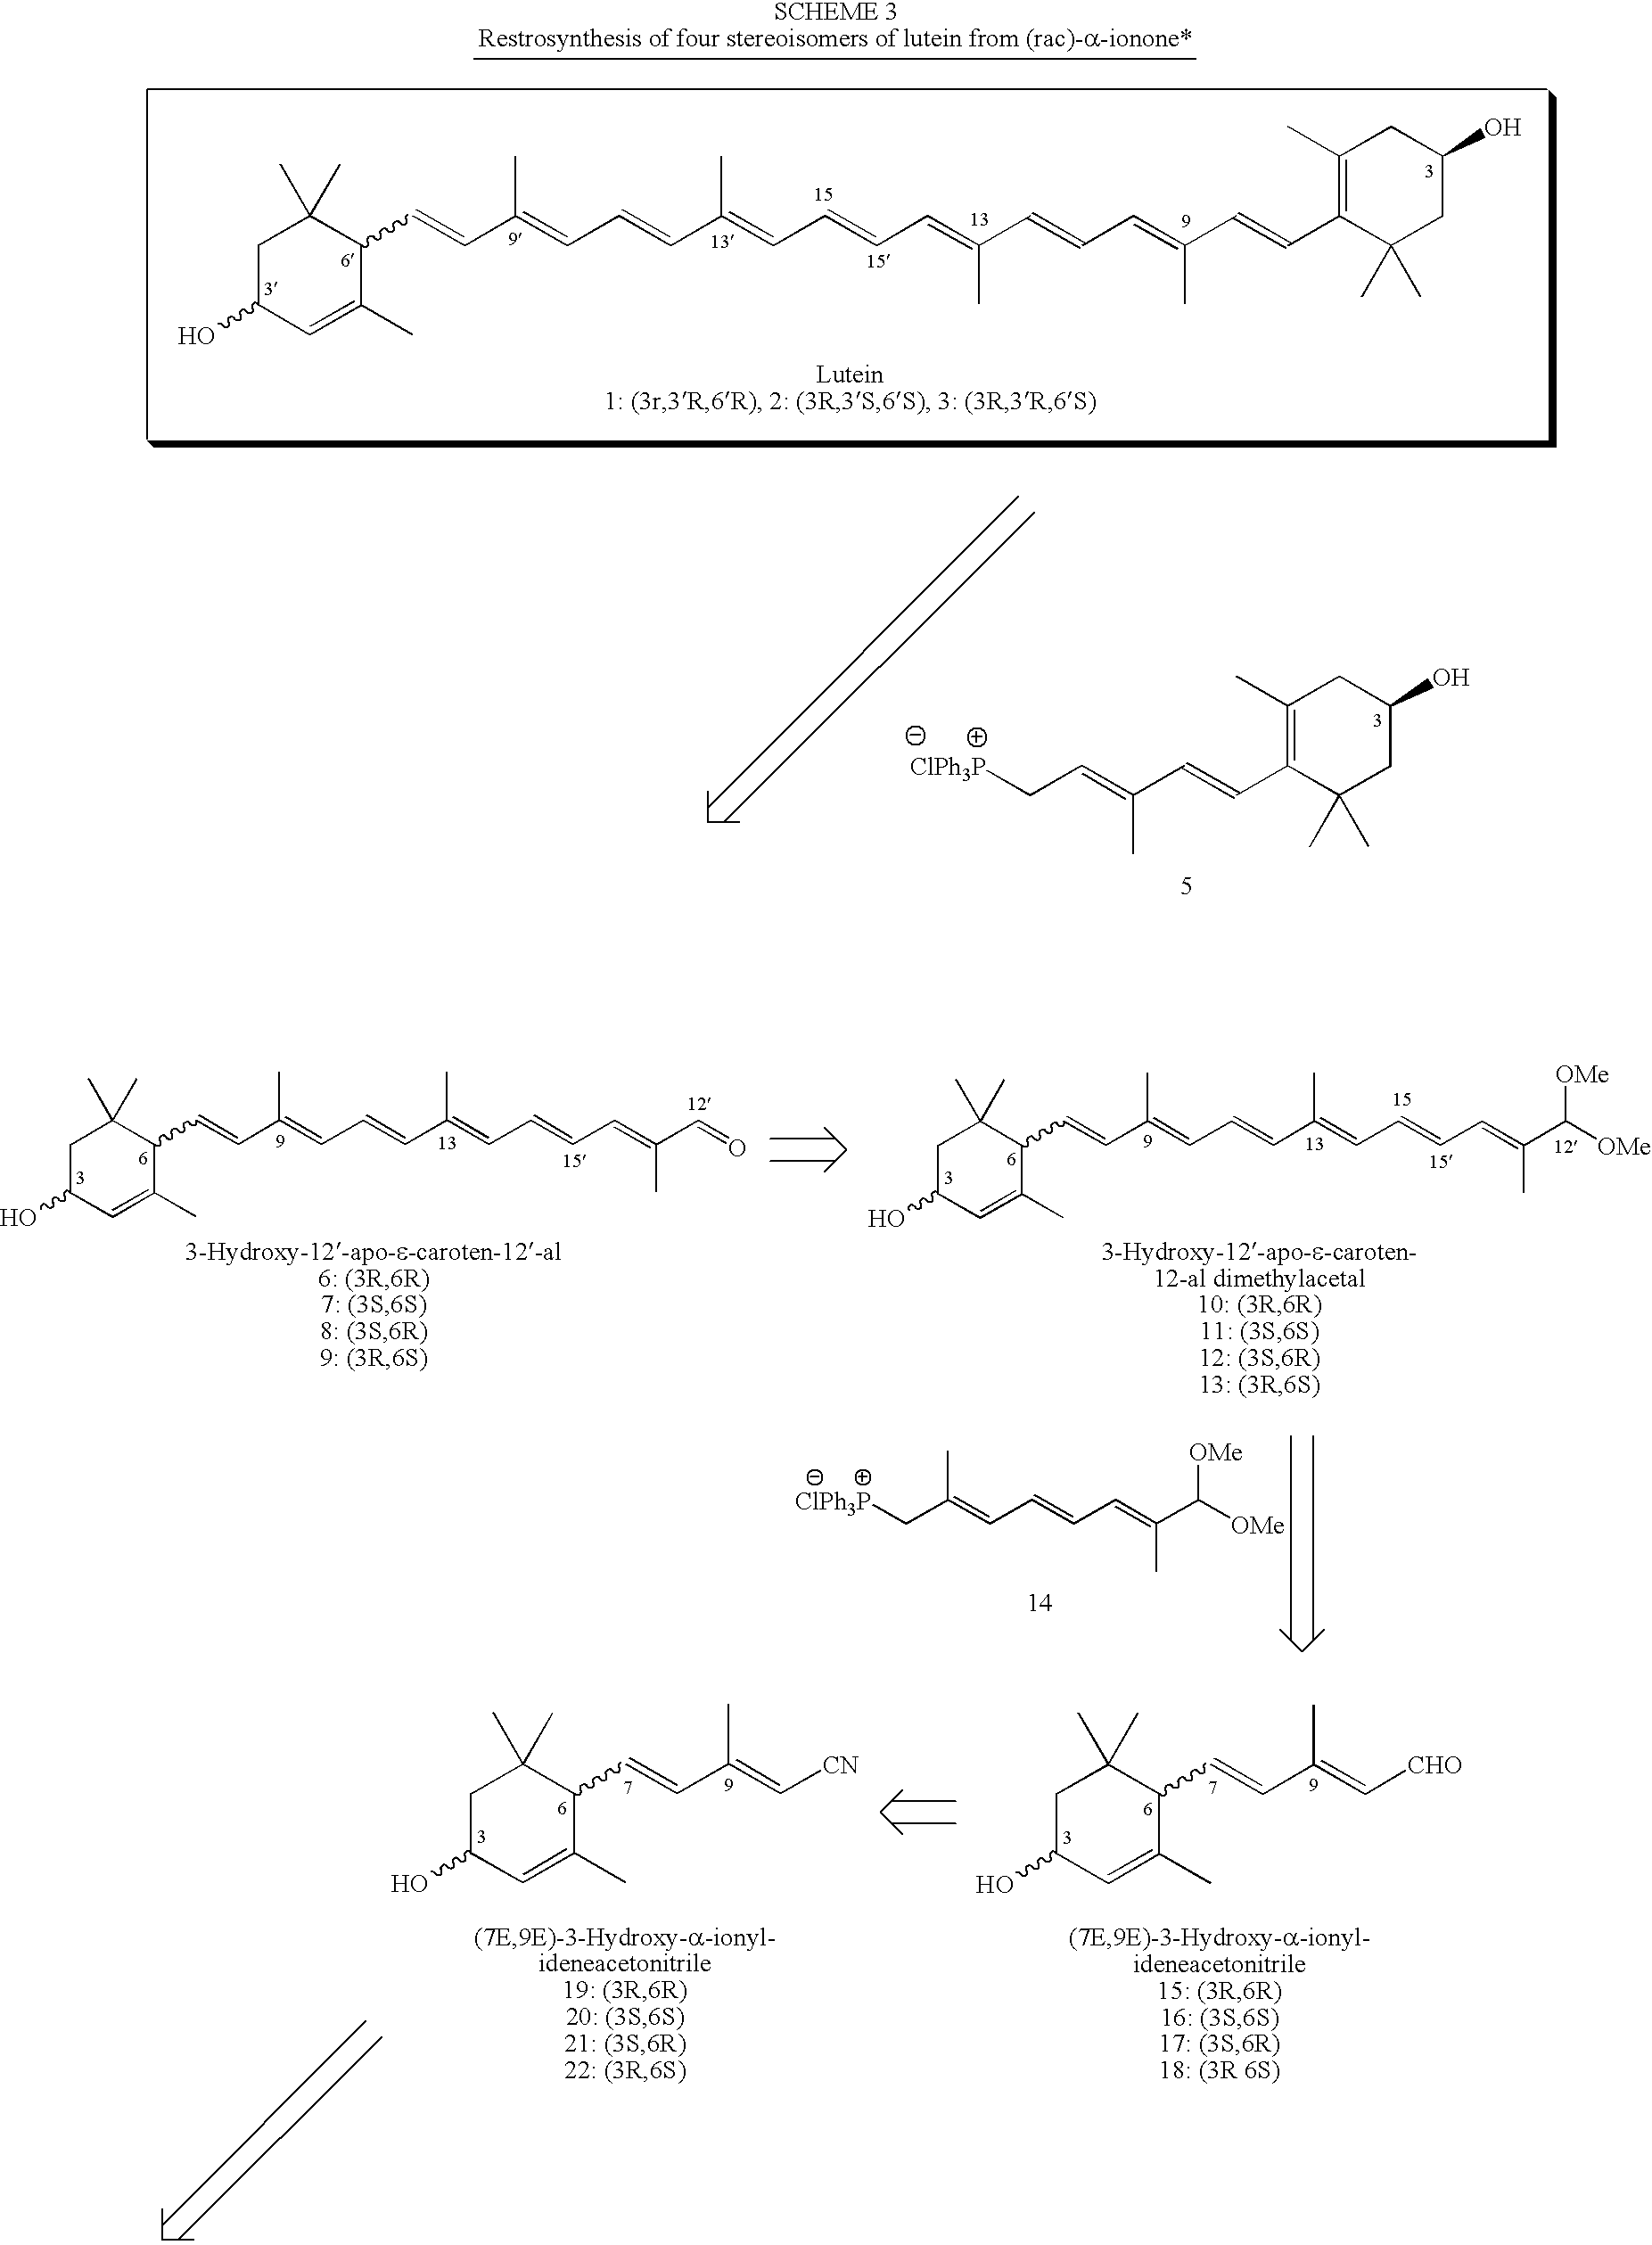 Process for Synthesis of (3R,3'R,6'R)-Lutein and its Stereoisomers